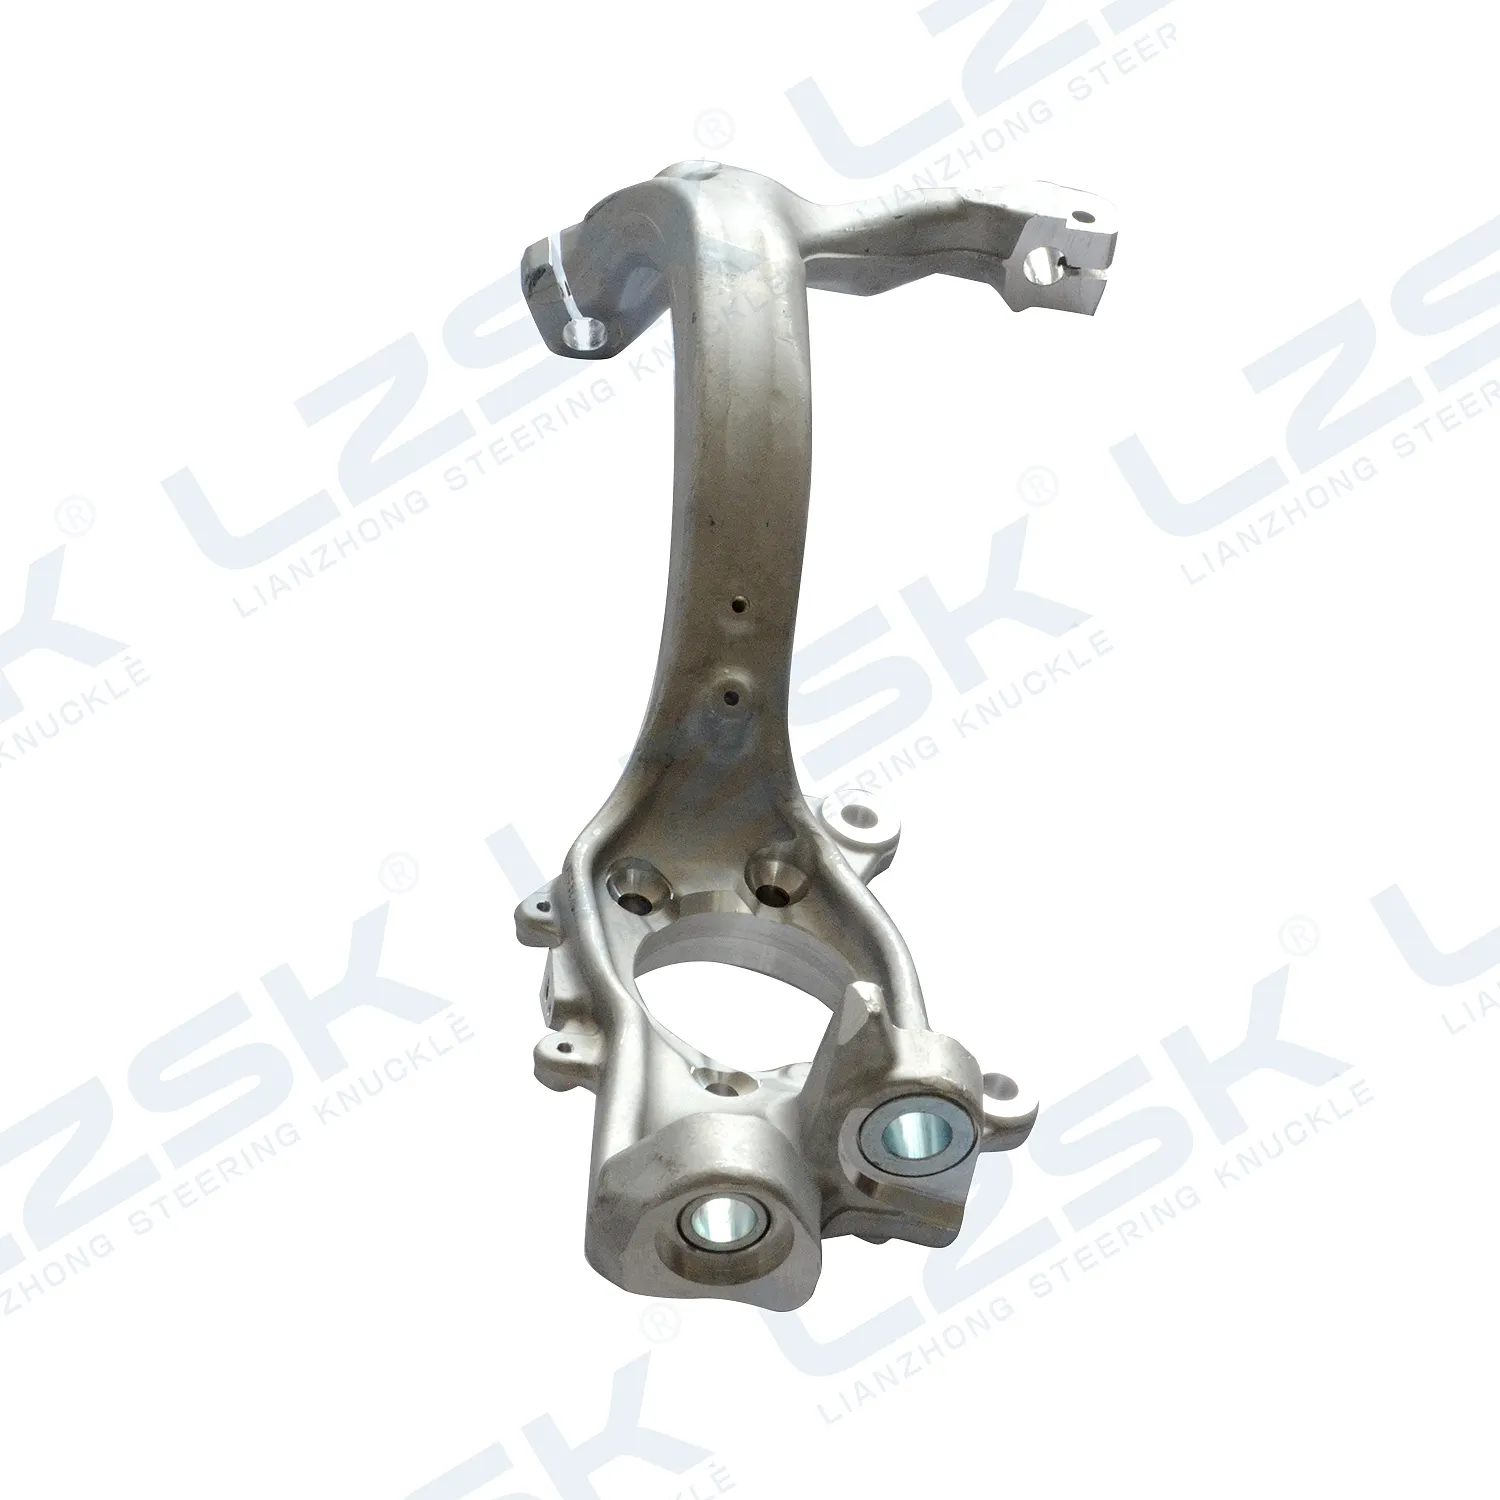 Wholesale Audi A6 C6 4F 2.7tdi 3.0tdi front Left Axle Joint steering knuckle 4F0407253H exportador